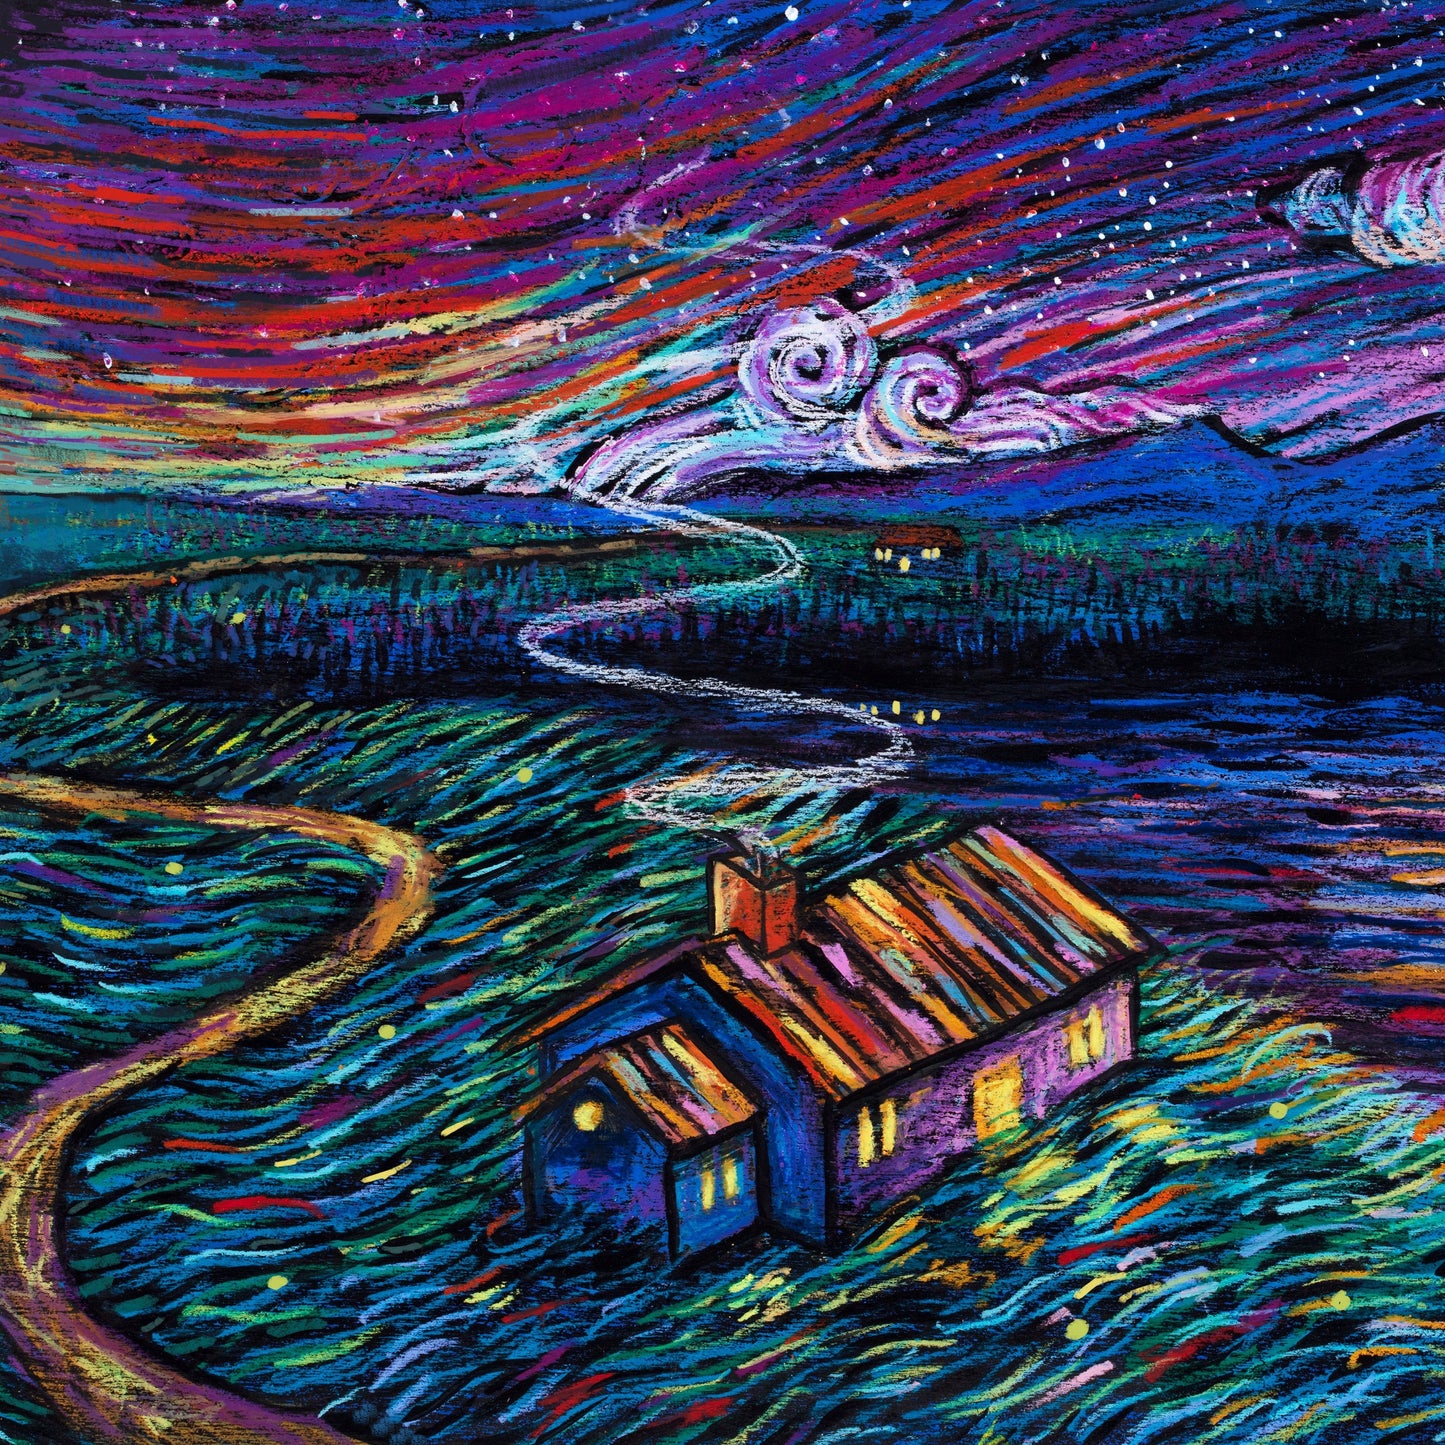 Hidden Moon Lake (Limited Edition of 150) Print James R. Eads